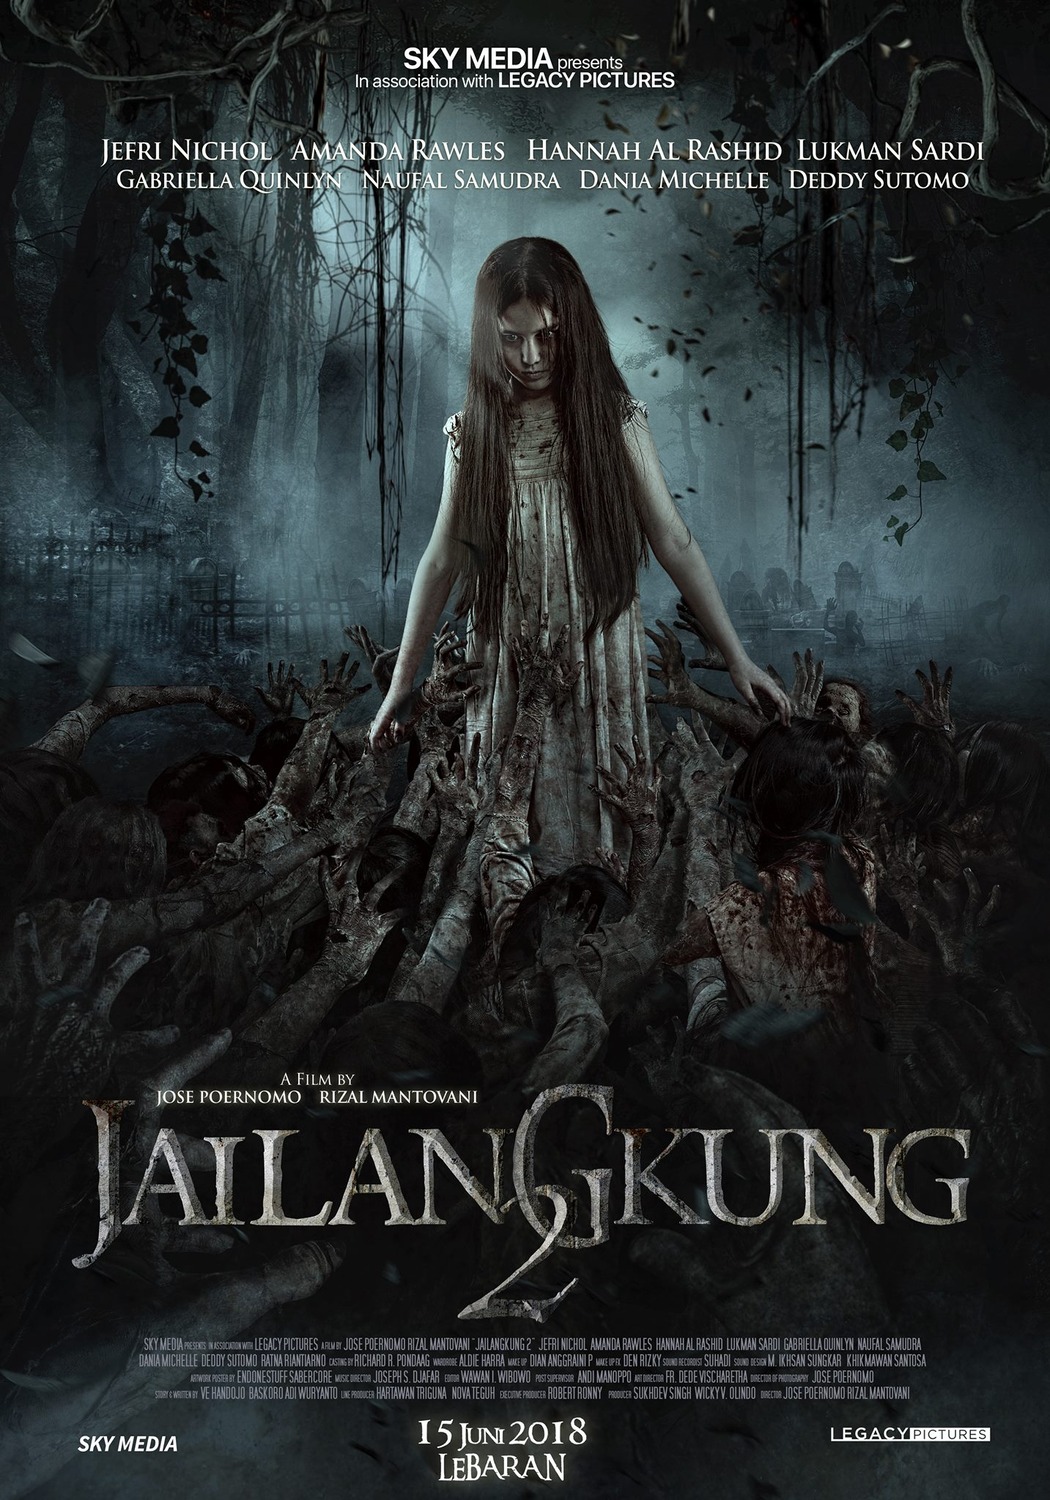 Extra Large Movie Poster Image for Jailangkung 2 (#1 of 2)